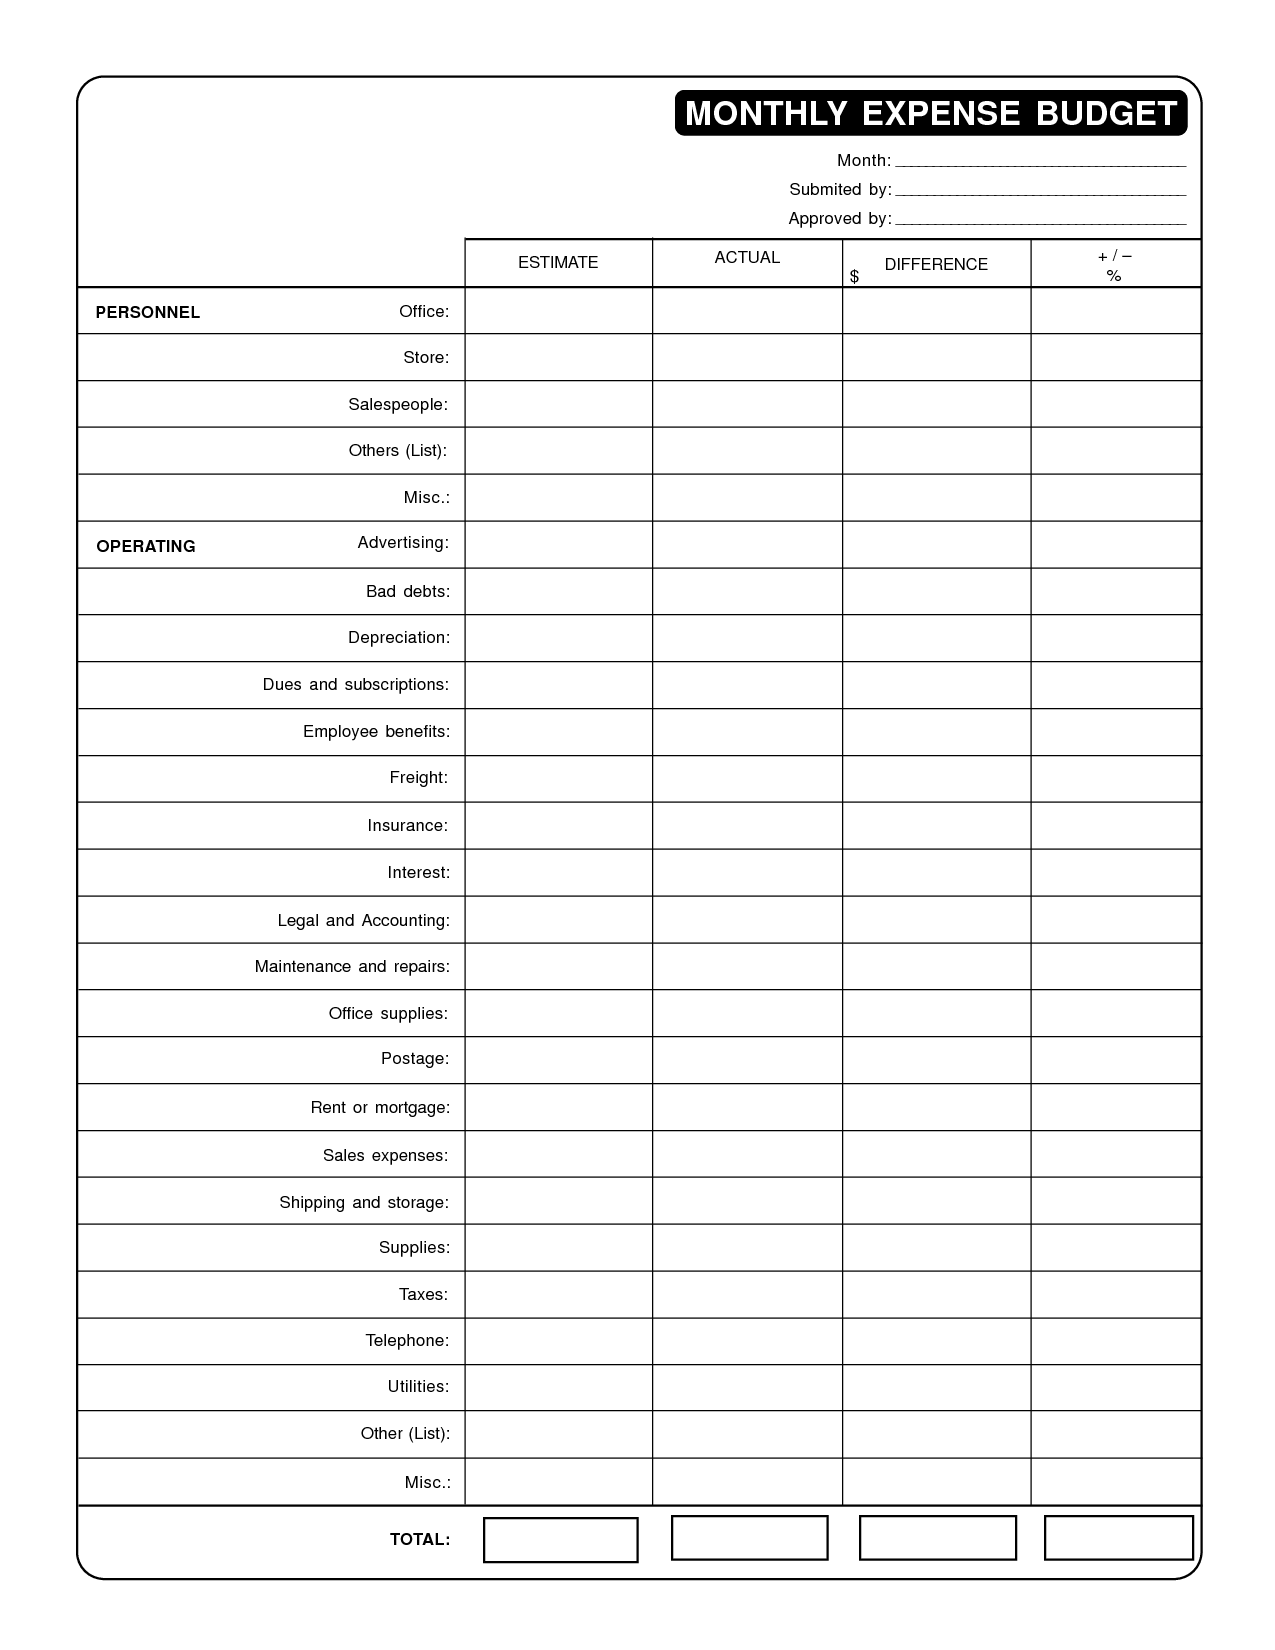 16 Best Images of Budget Worksheet Monthly Bill Blank Monthly Budget